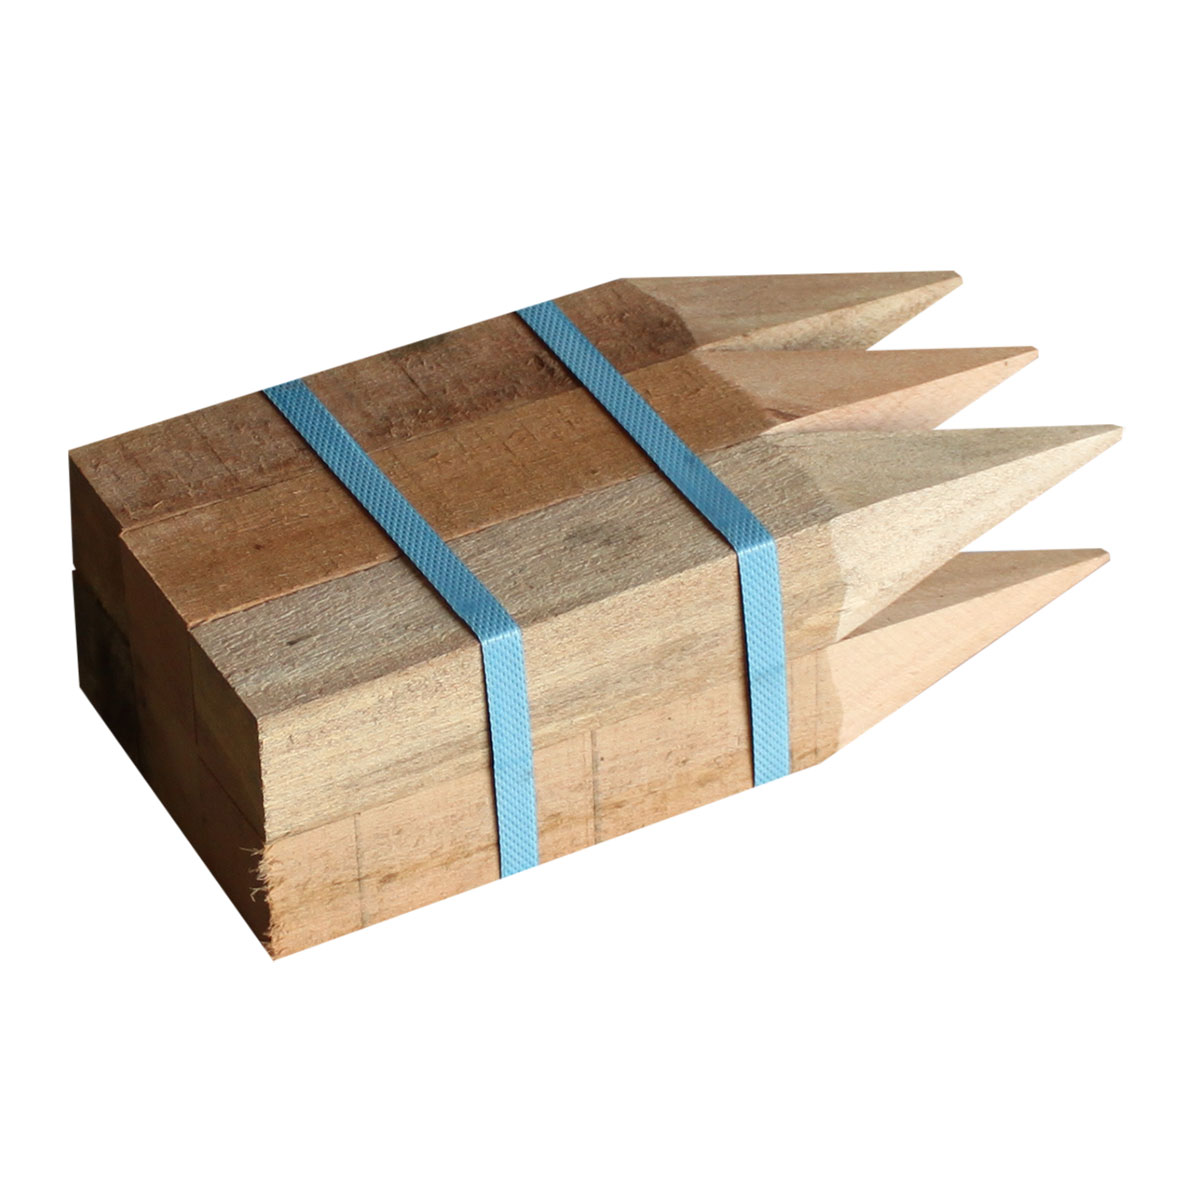 Hardwood Stakes 50 x 50 x 450mm - 6 Pack